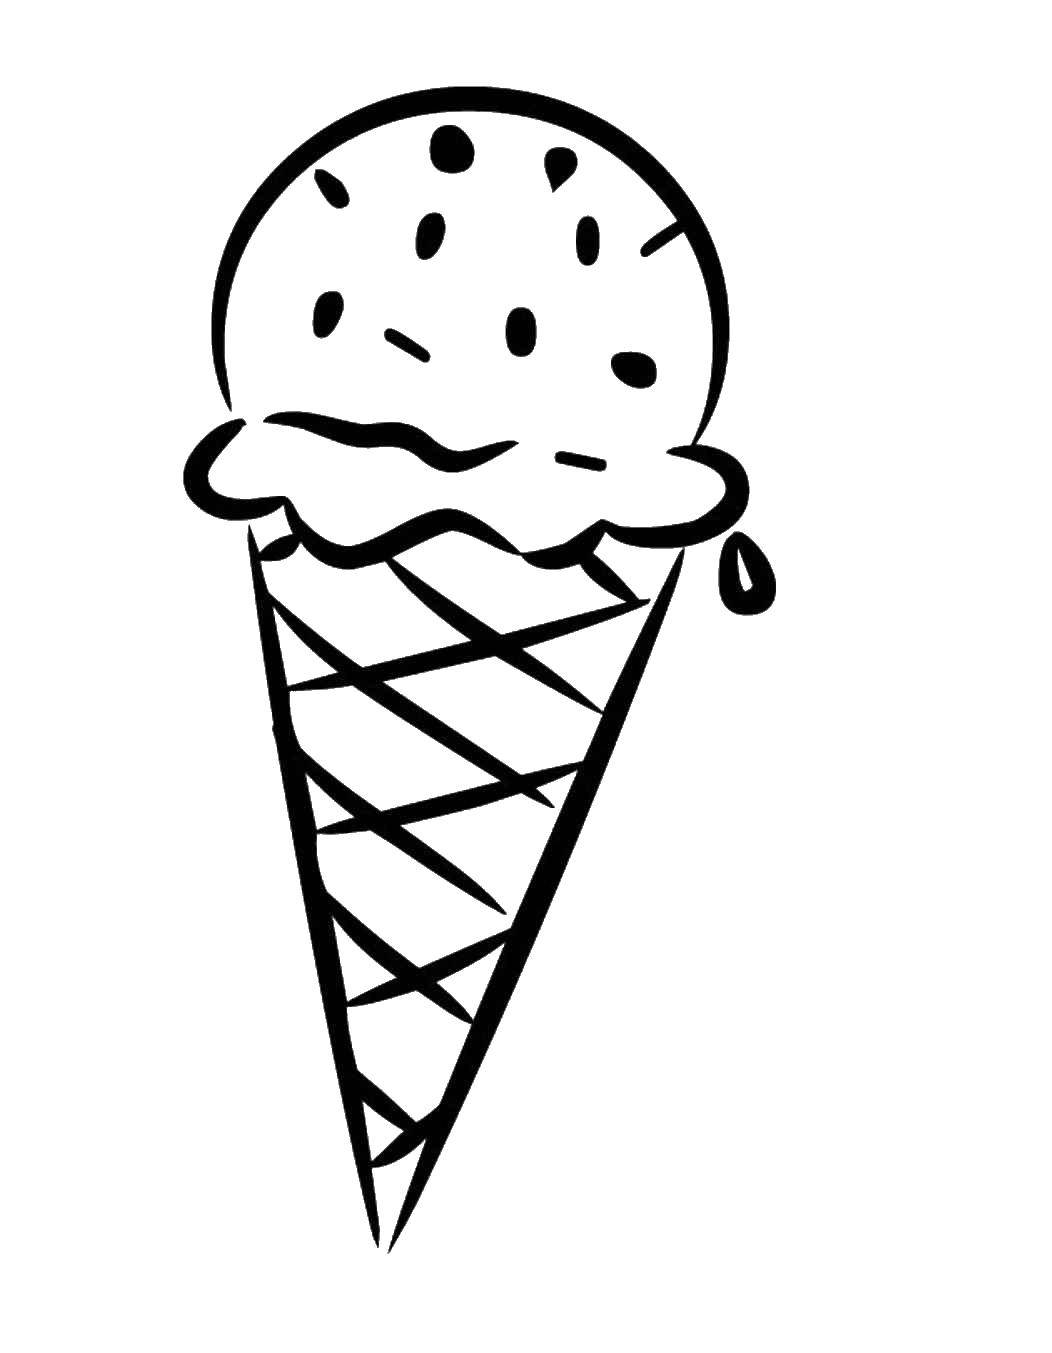 Coloring Ice cream and waffle cone. Category ice cream. Tags:  ice cream, cone, wafer.